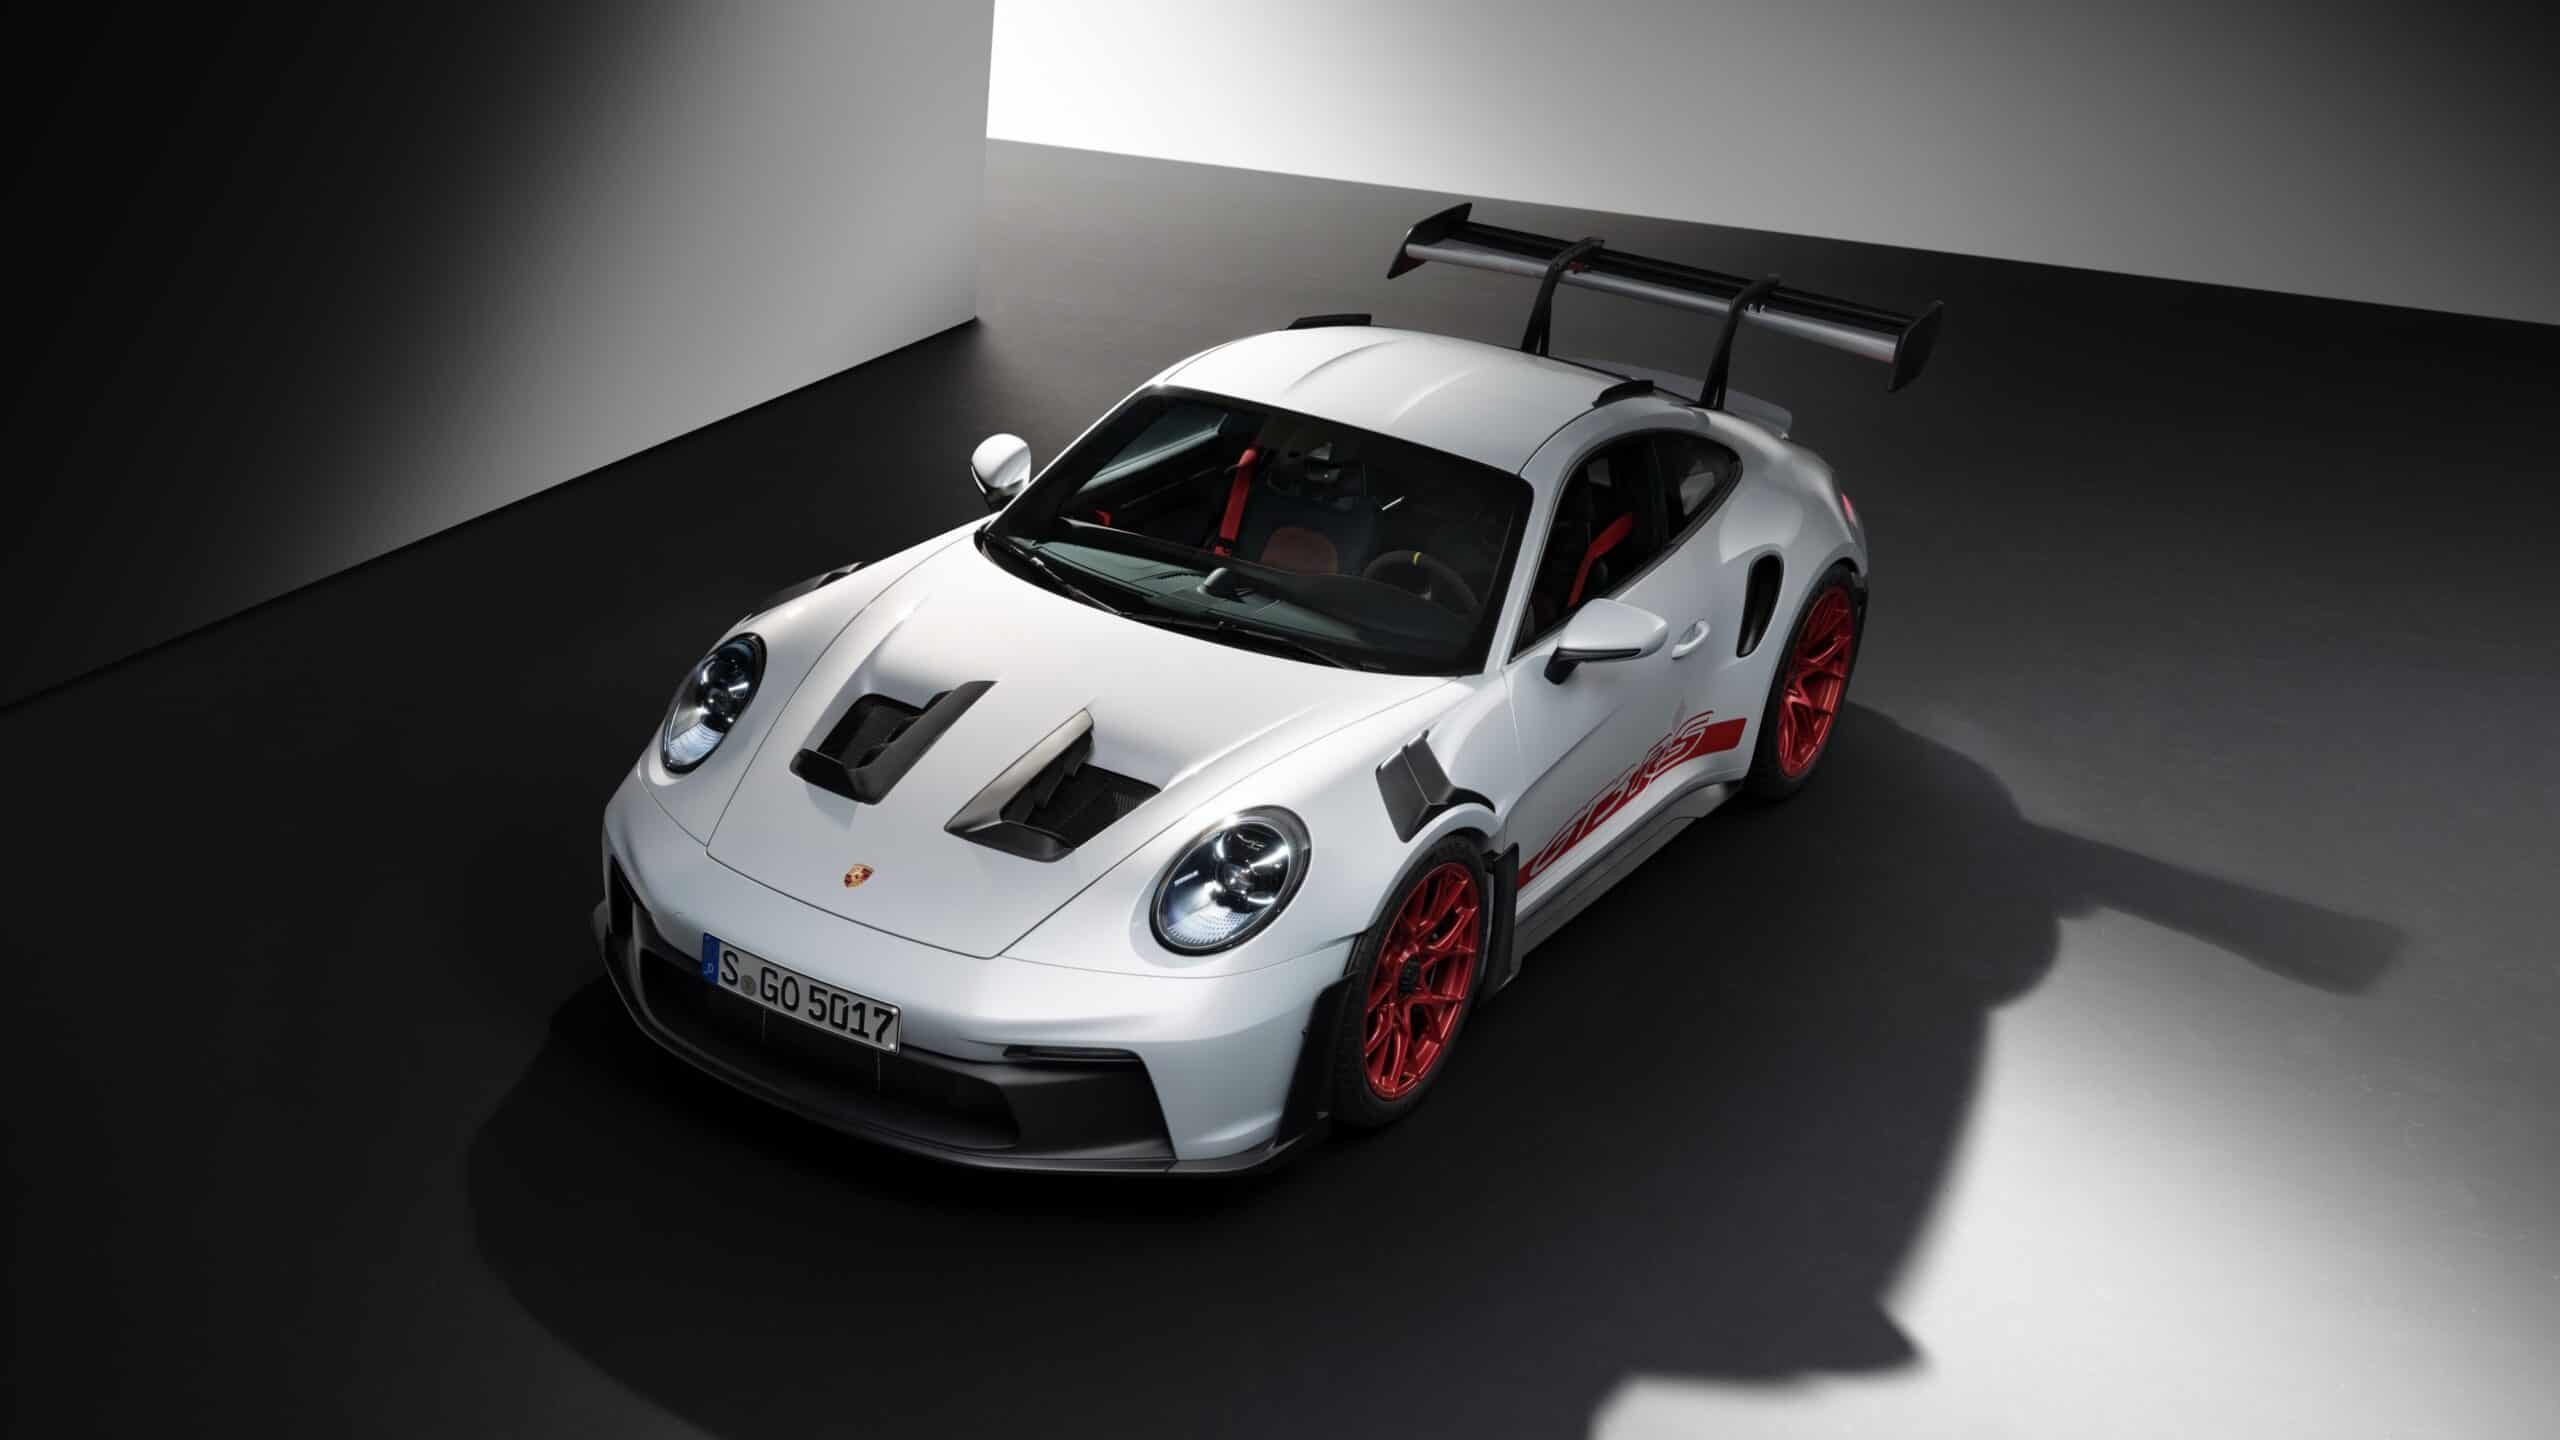 The New 911 GT3 RS - A Race Car For The Road!